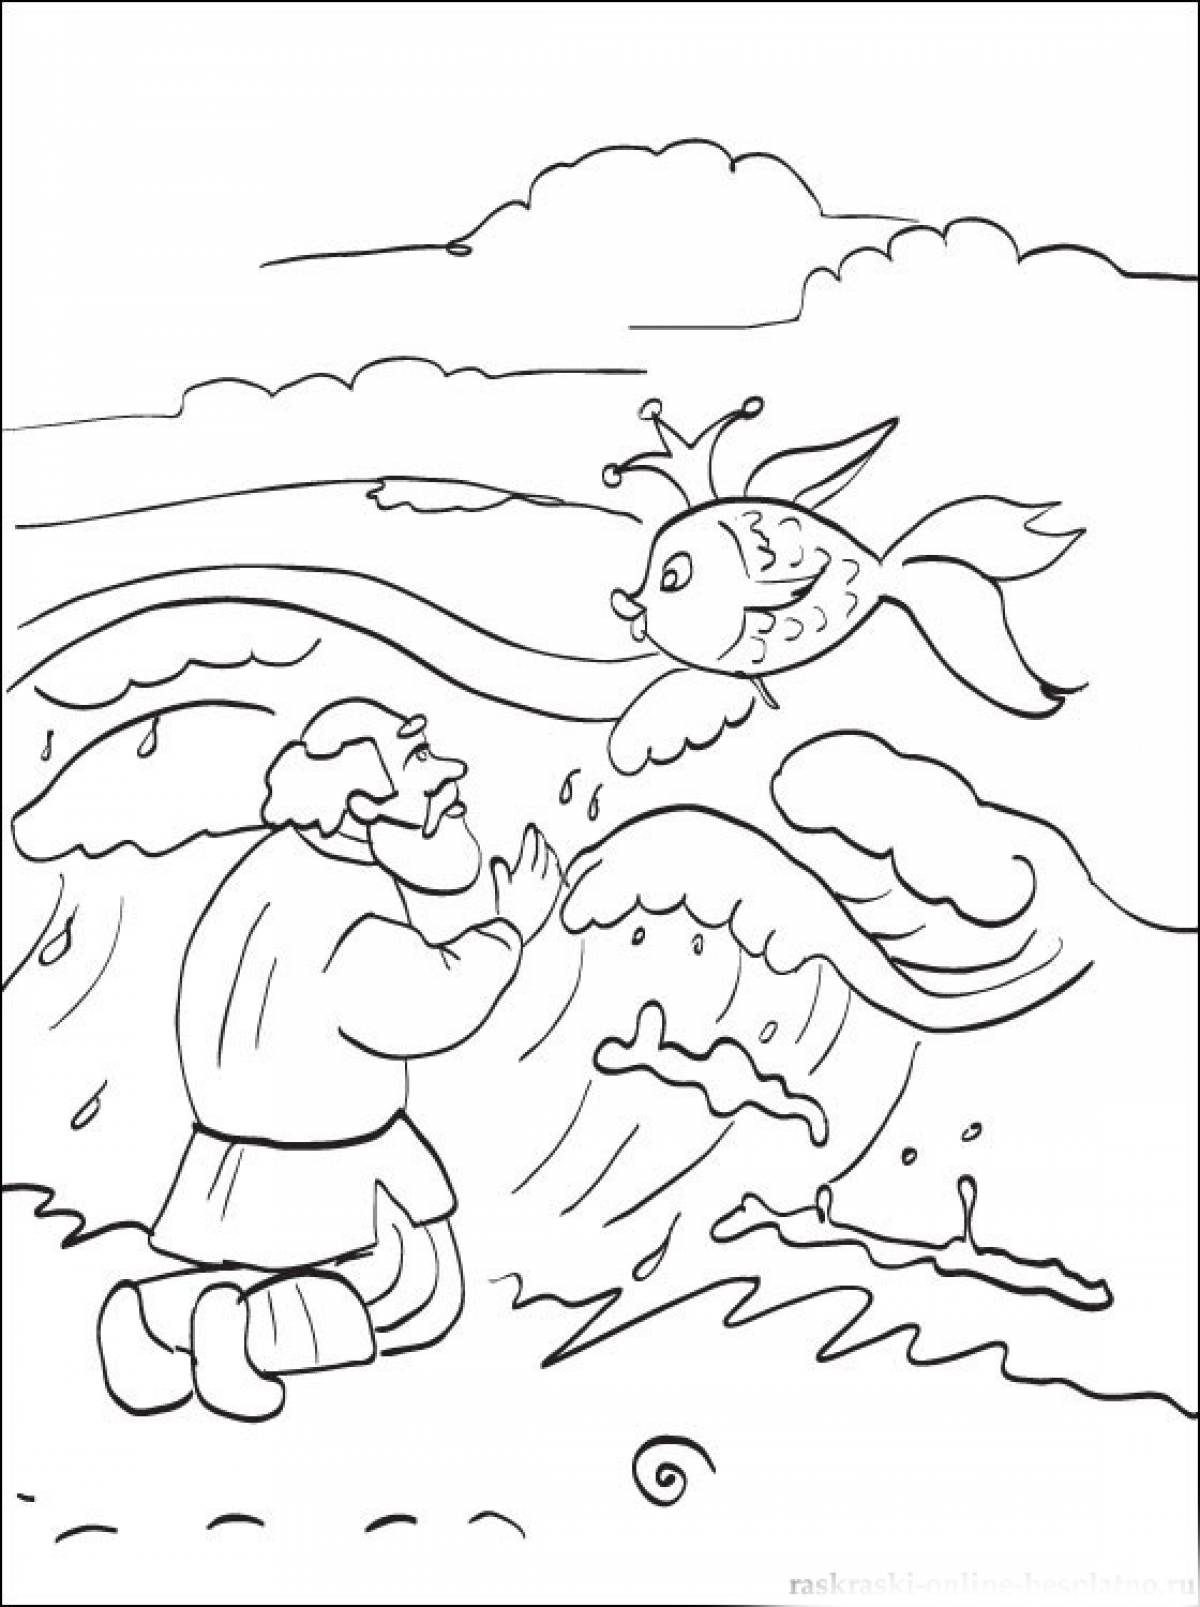 Coloring page old man and fish